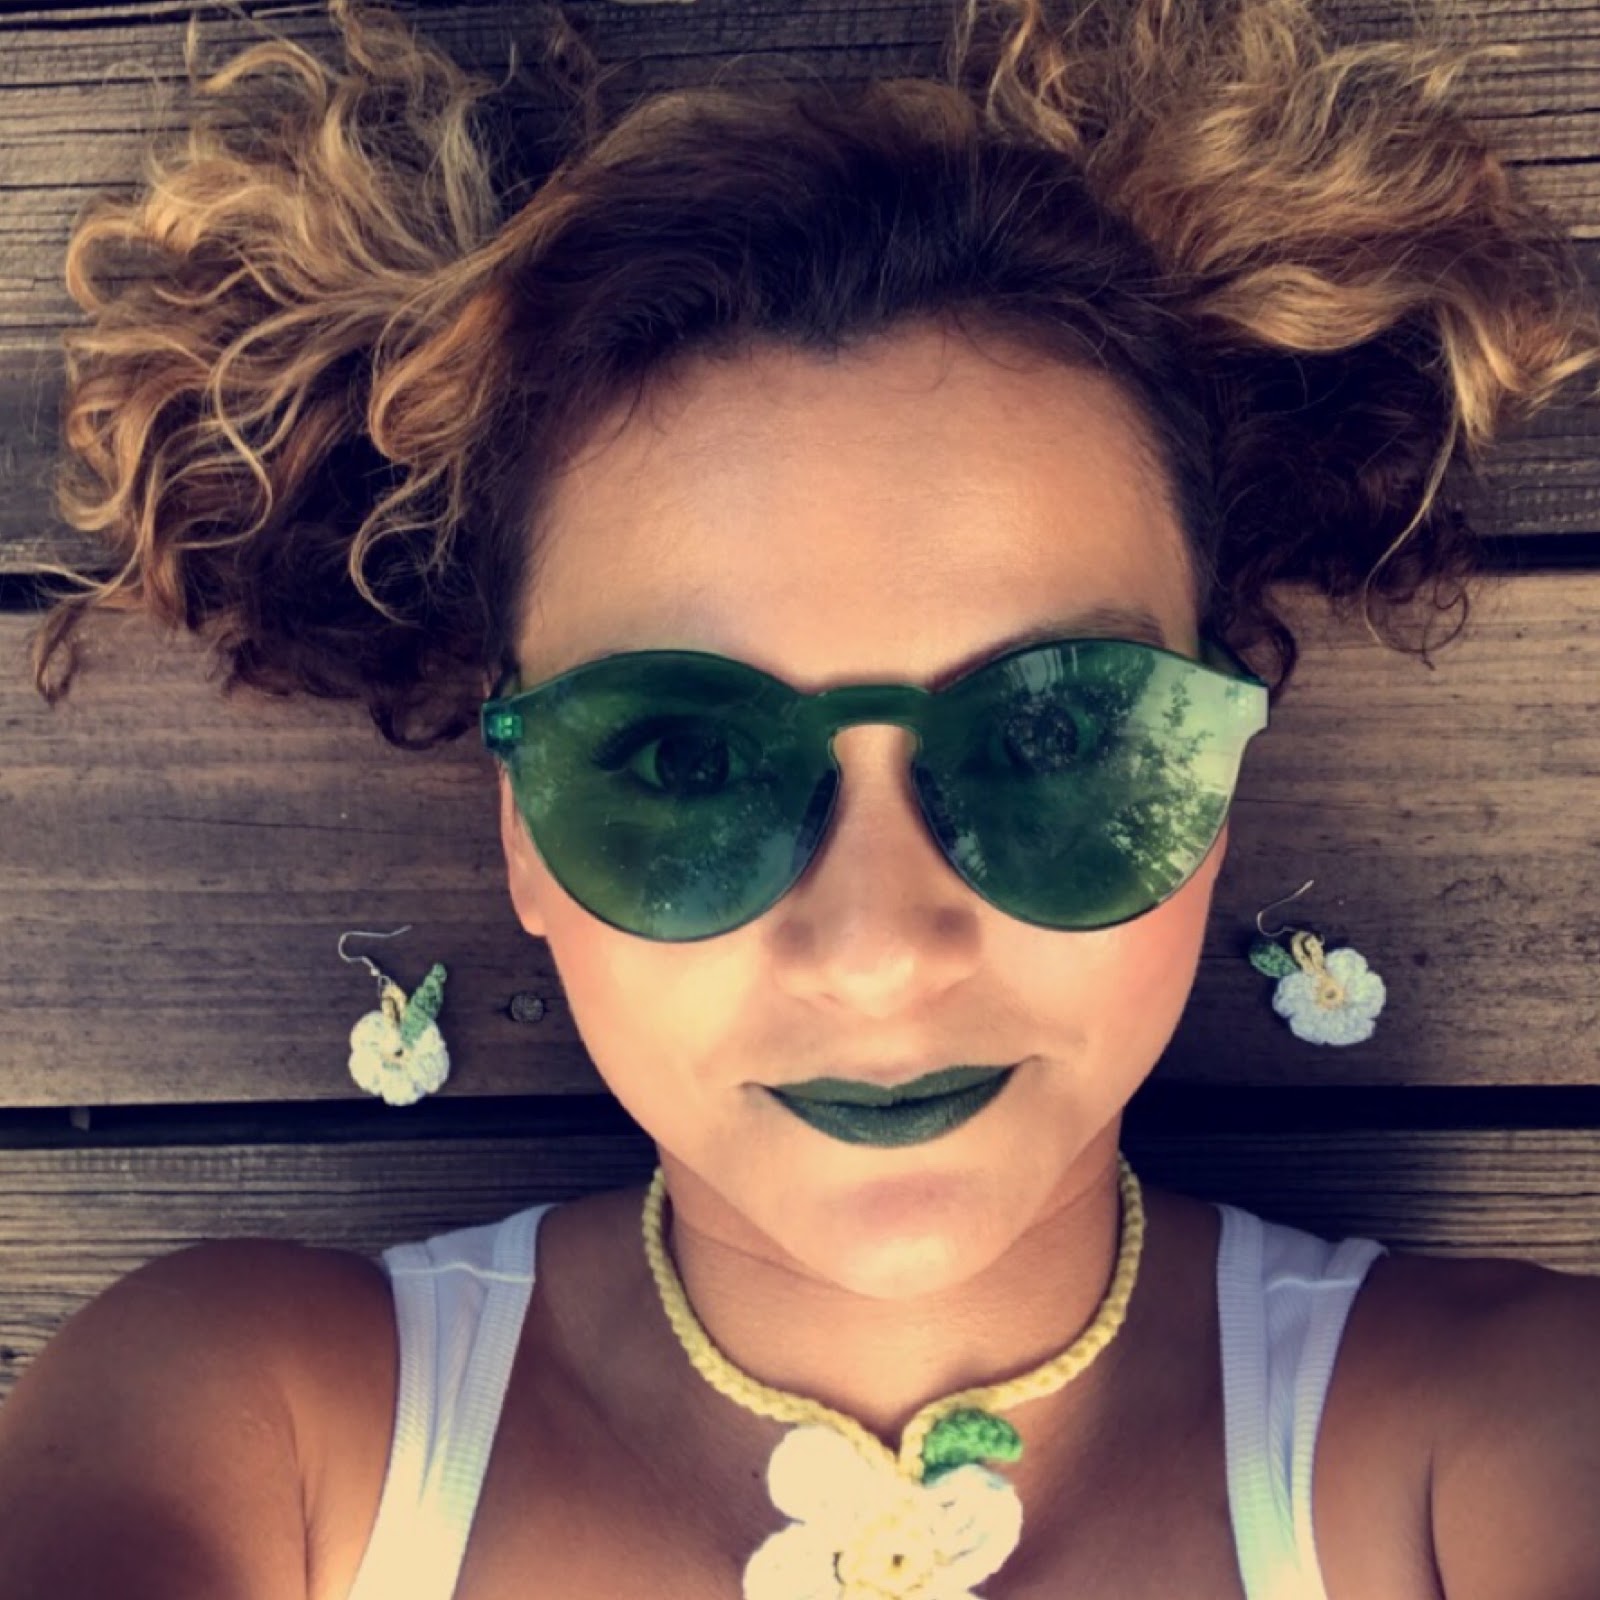 Discover Pop music, stream free and download songs & albums, watch music videos and explore Florida's independent/emerging music scene with Lina Marques